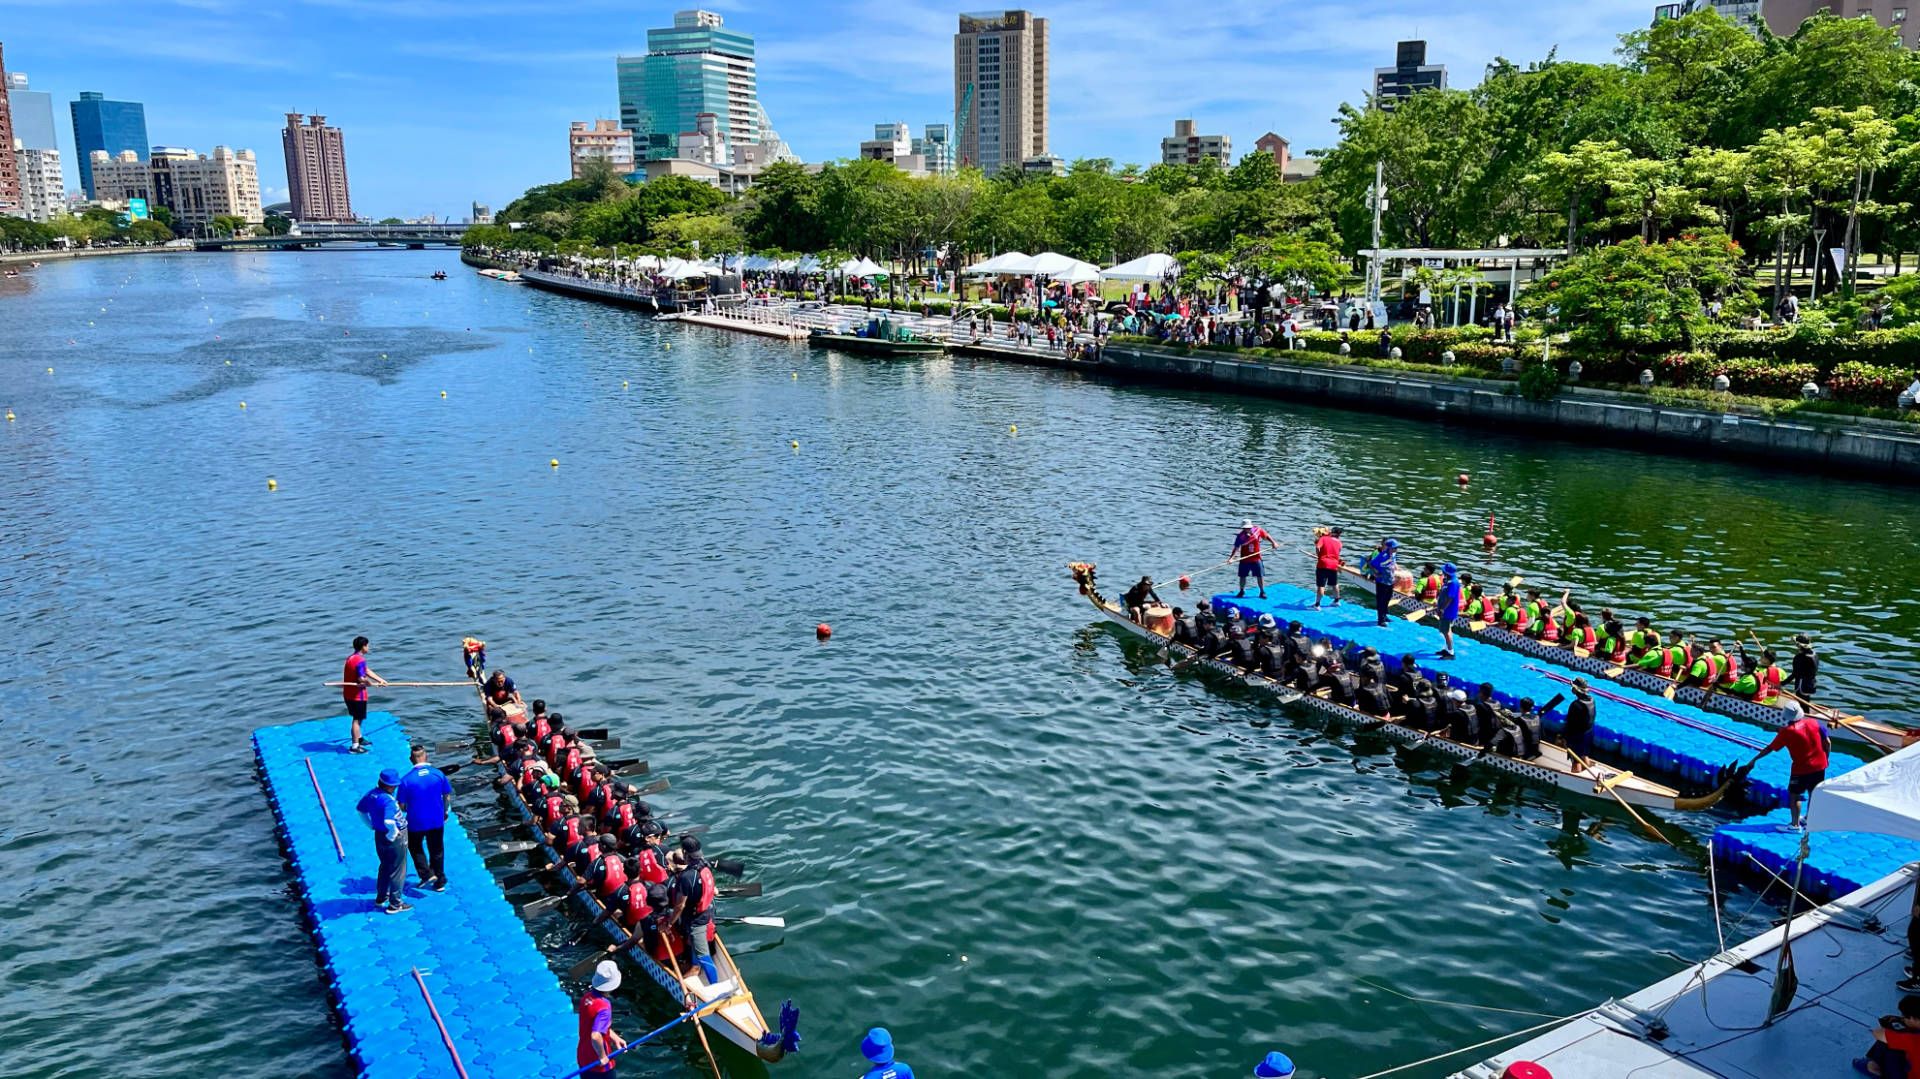 Three dragon boats at the starting gate on Love River, Kaohsiung. It is a beautiful sunny day with calm water and a blue sky.